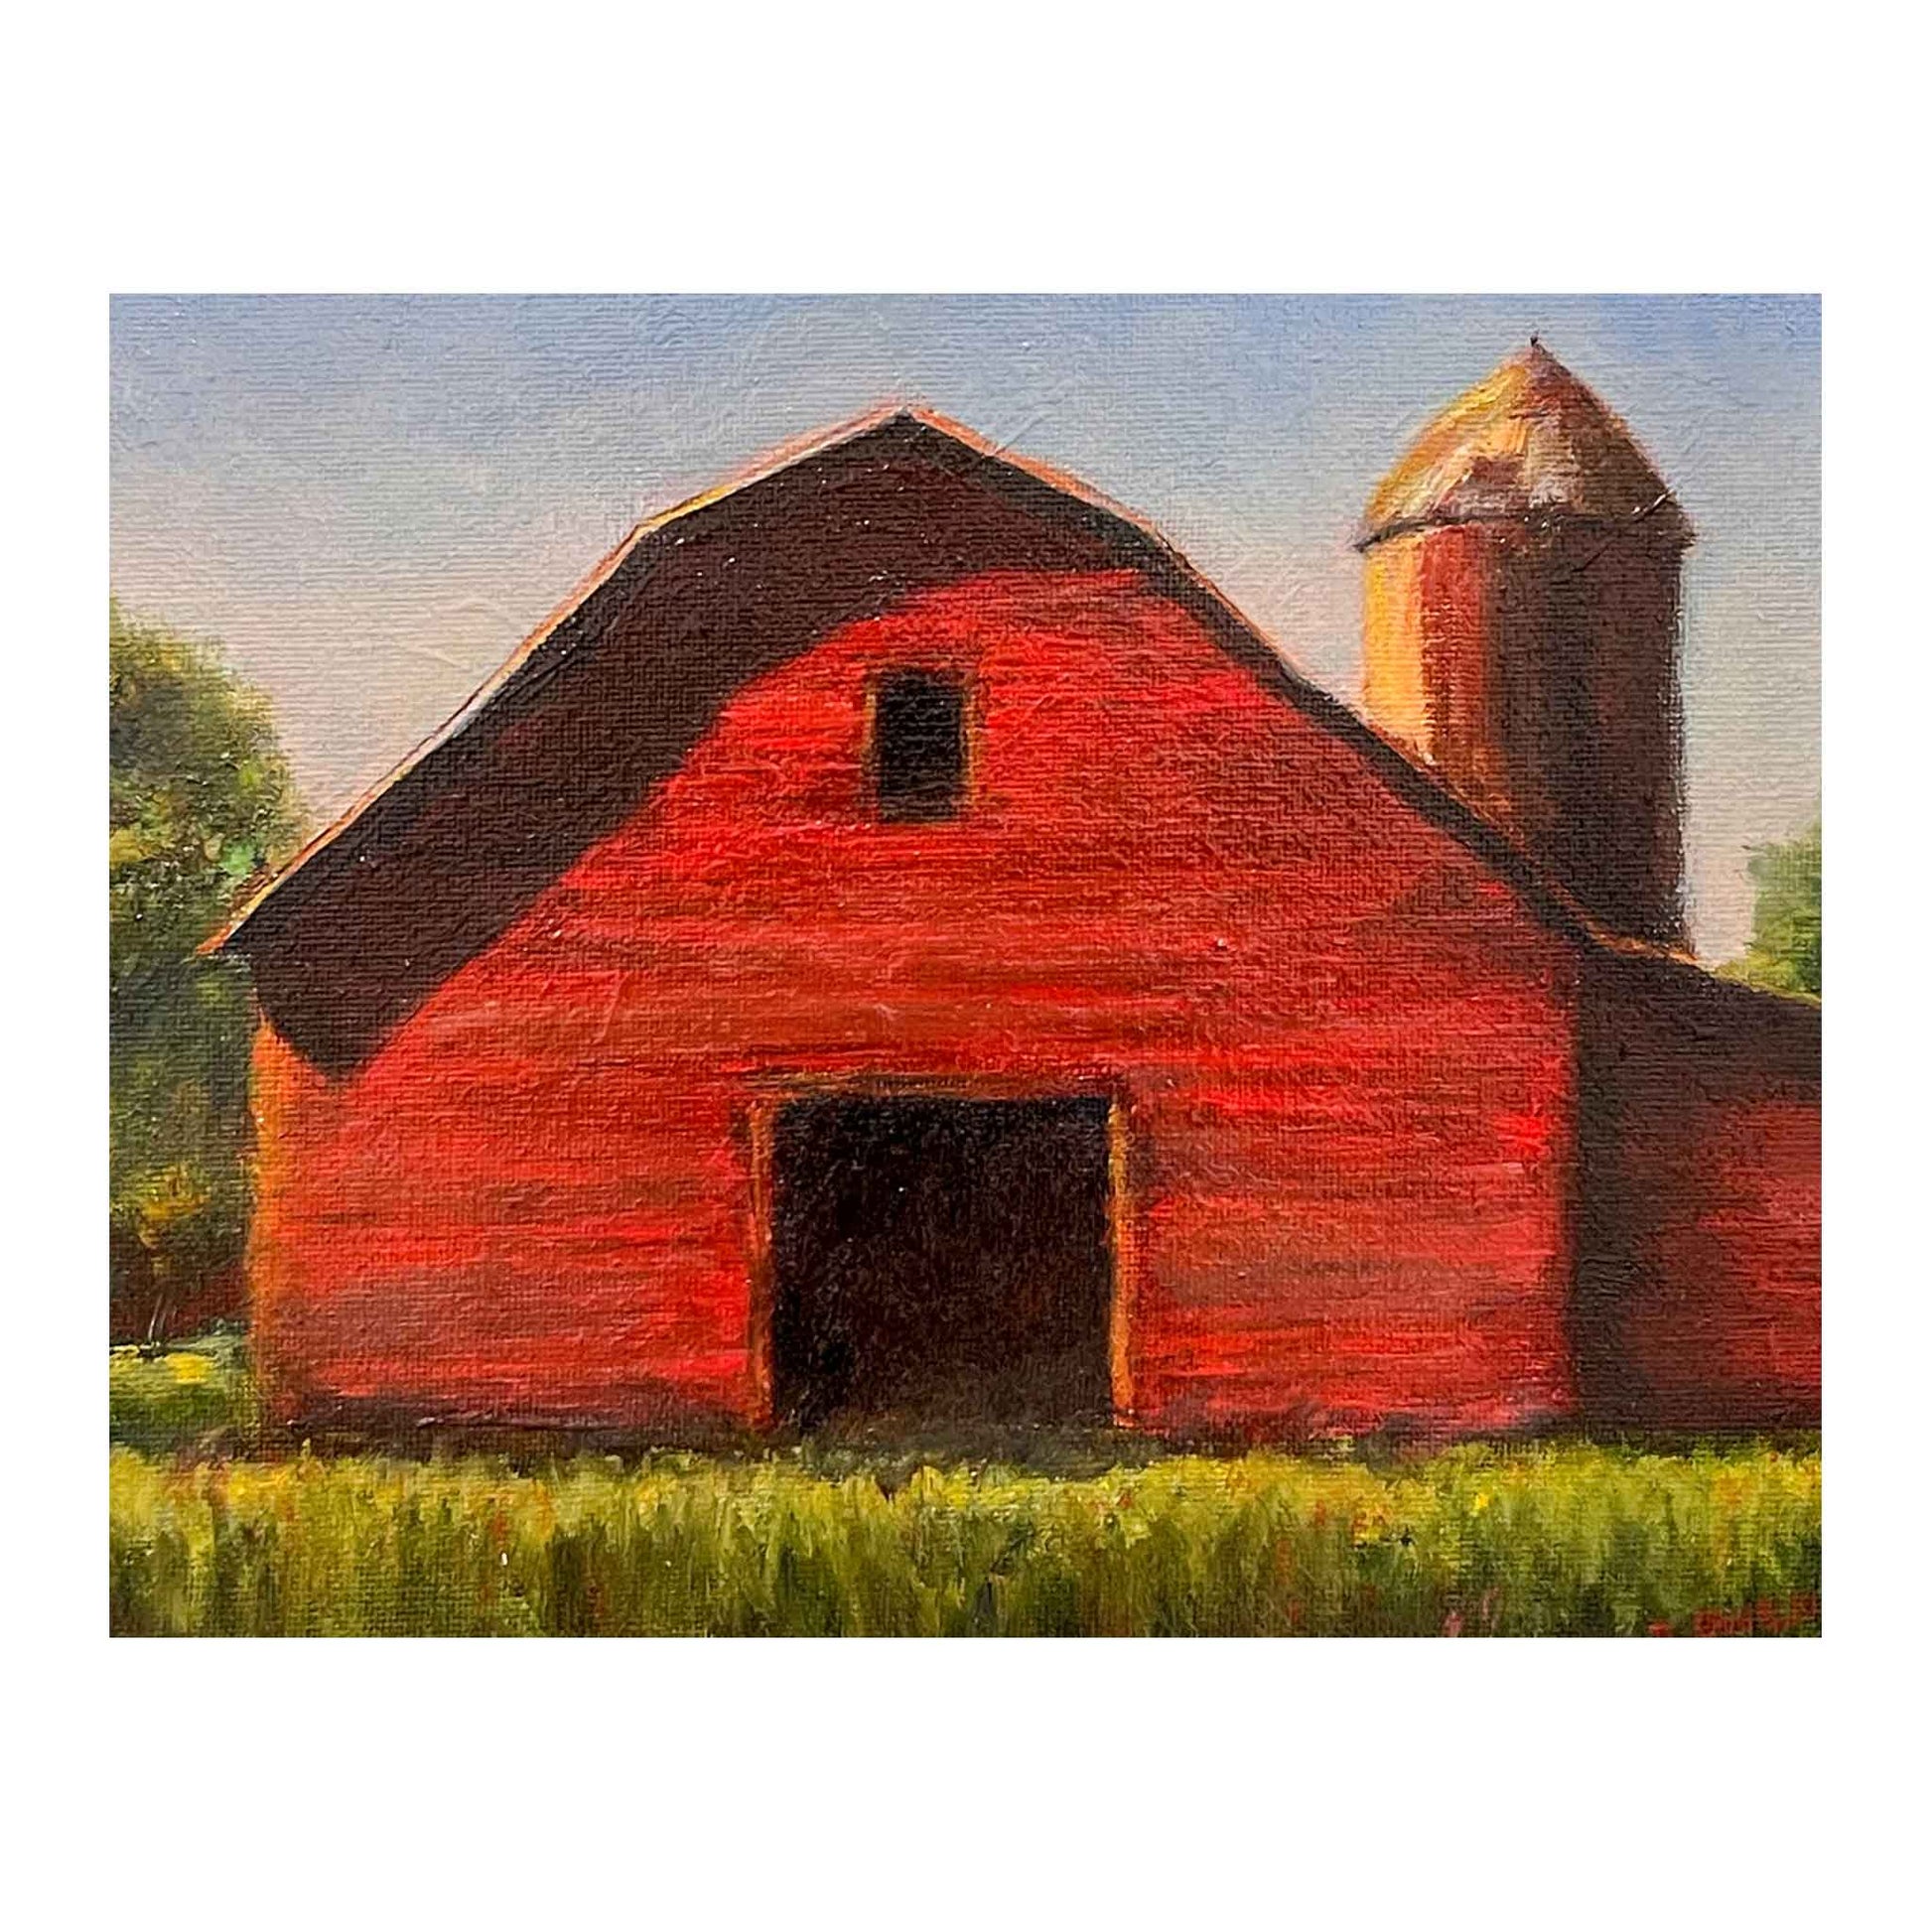 JRO Joe Frank's Barn Original Oil Painting by Becky Owen. Original oip painting of a lovely old red barn in a field of green grass. Large stately trees recede into the background. The pale blue sky is tinged with early morning light. Measures 12 " x 13" and framed in a lovely wooden frame.